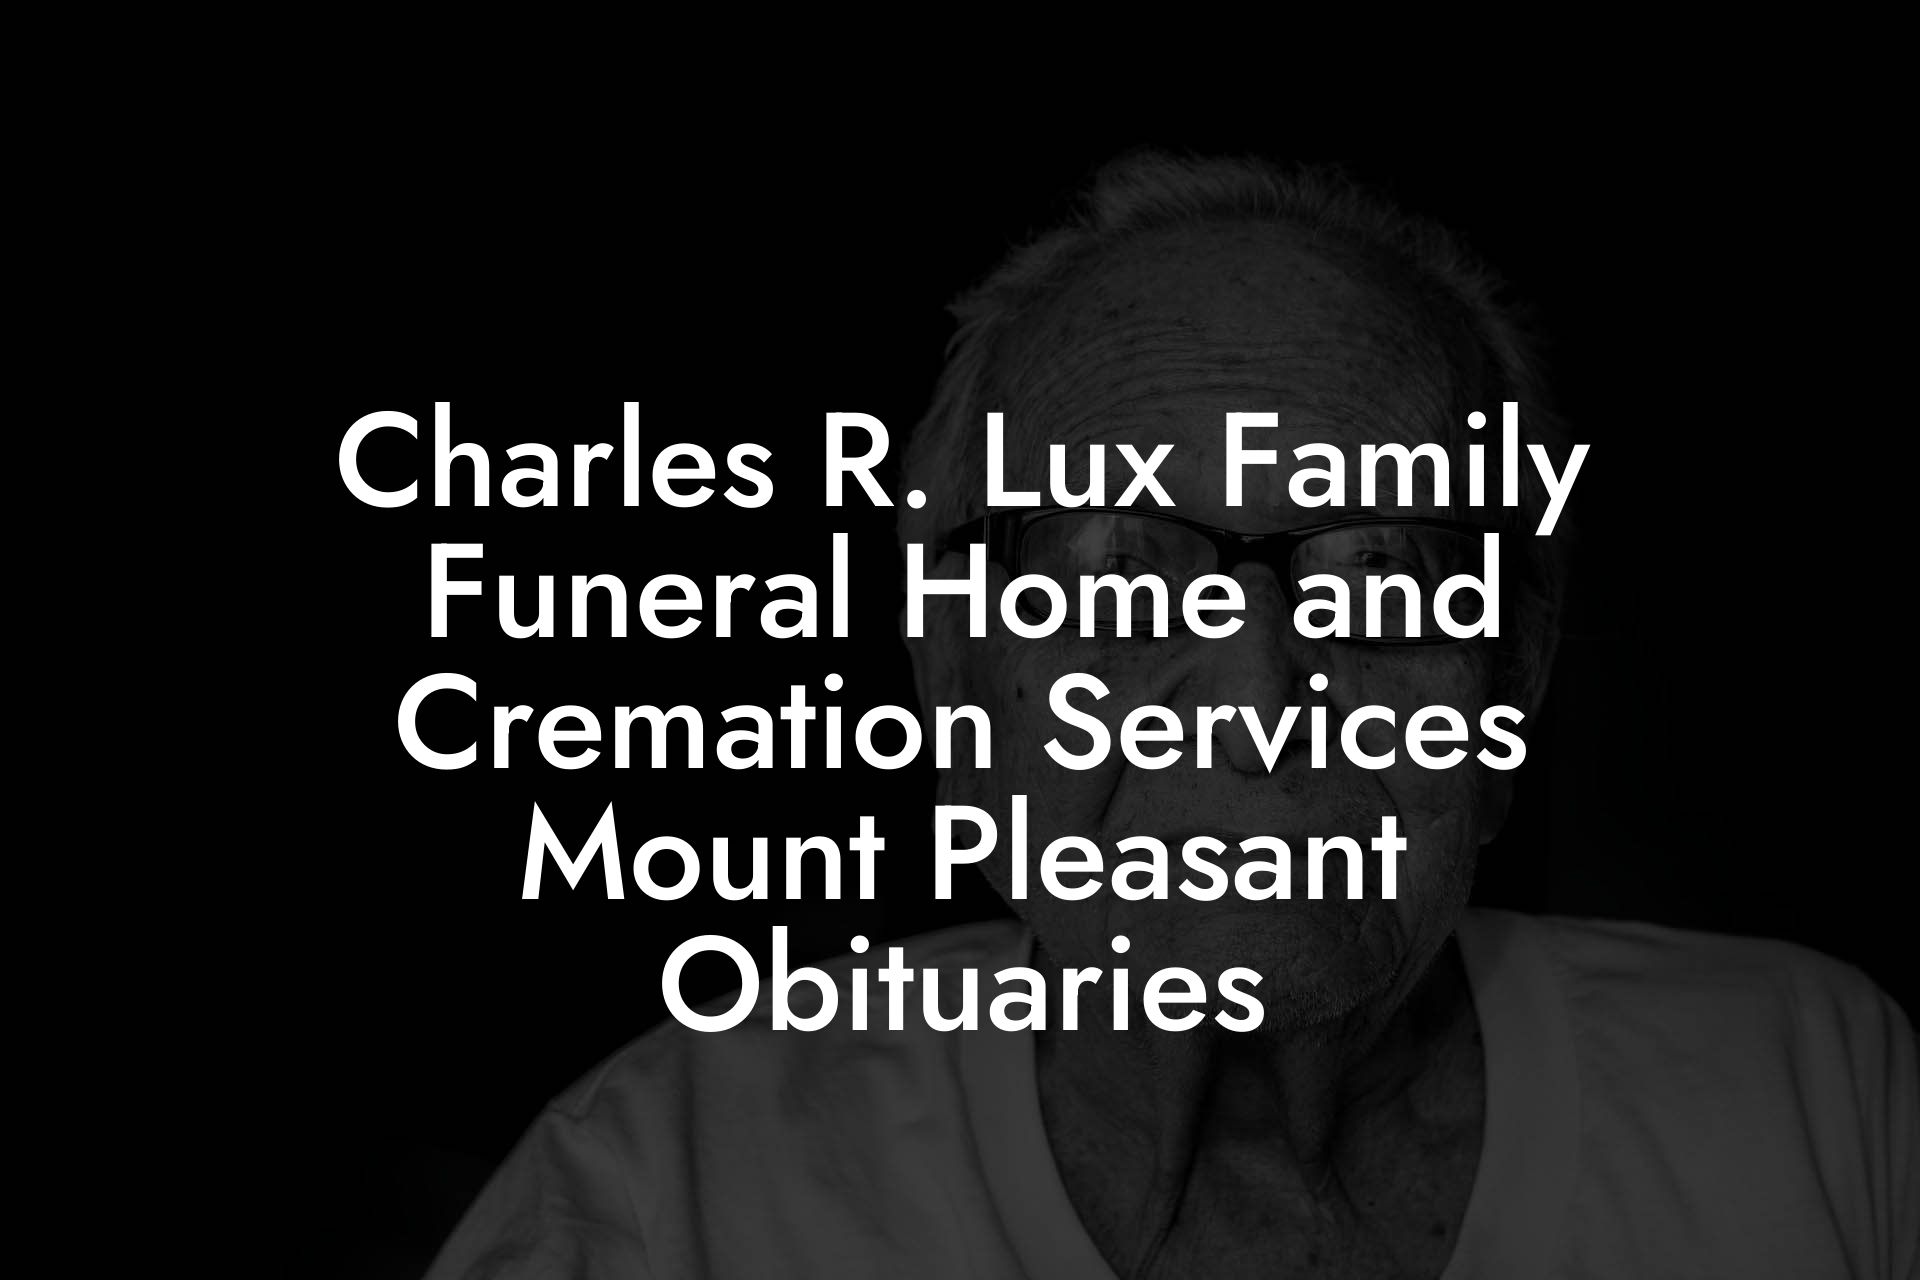 Charles R. Lux Family Funeral Home and Cremation Services Mount Pleasant Obituaries